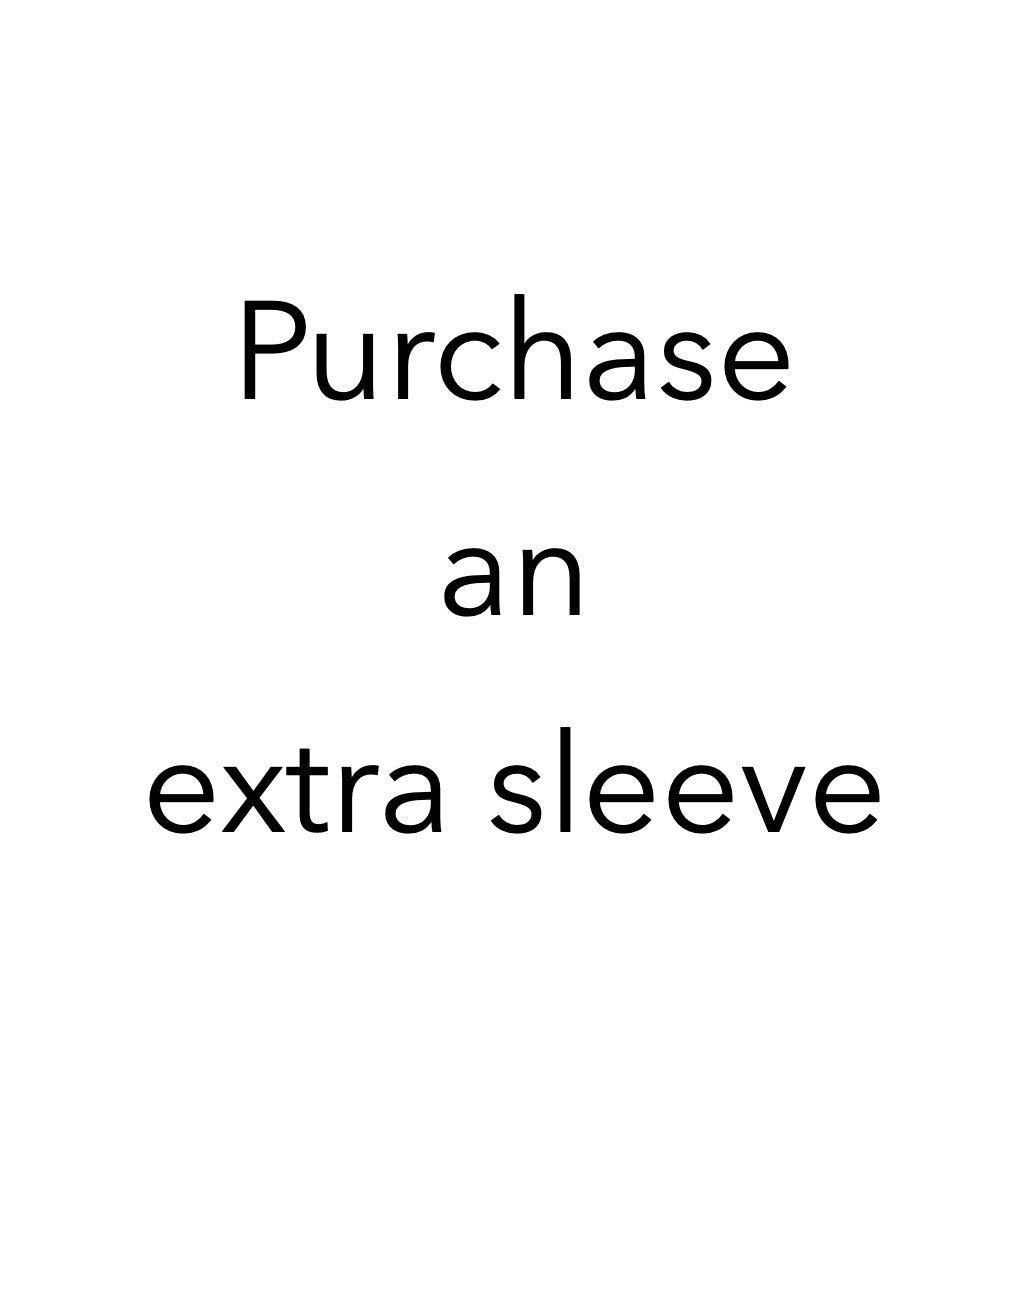 Add extra sleeves